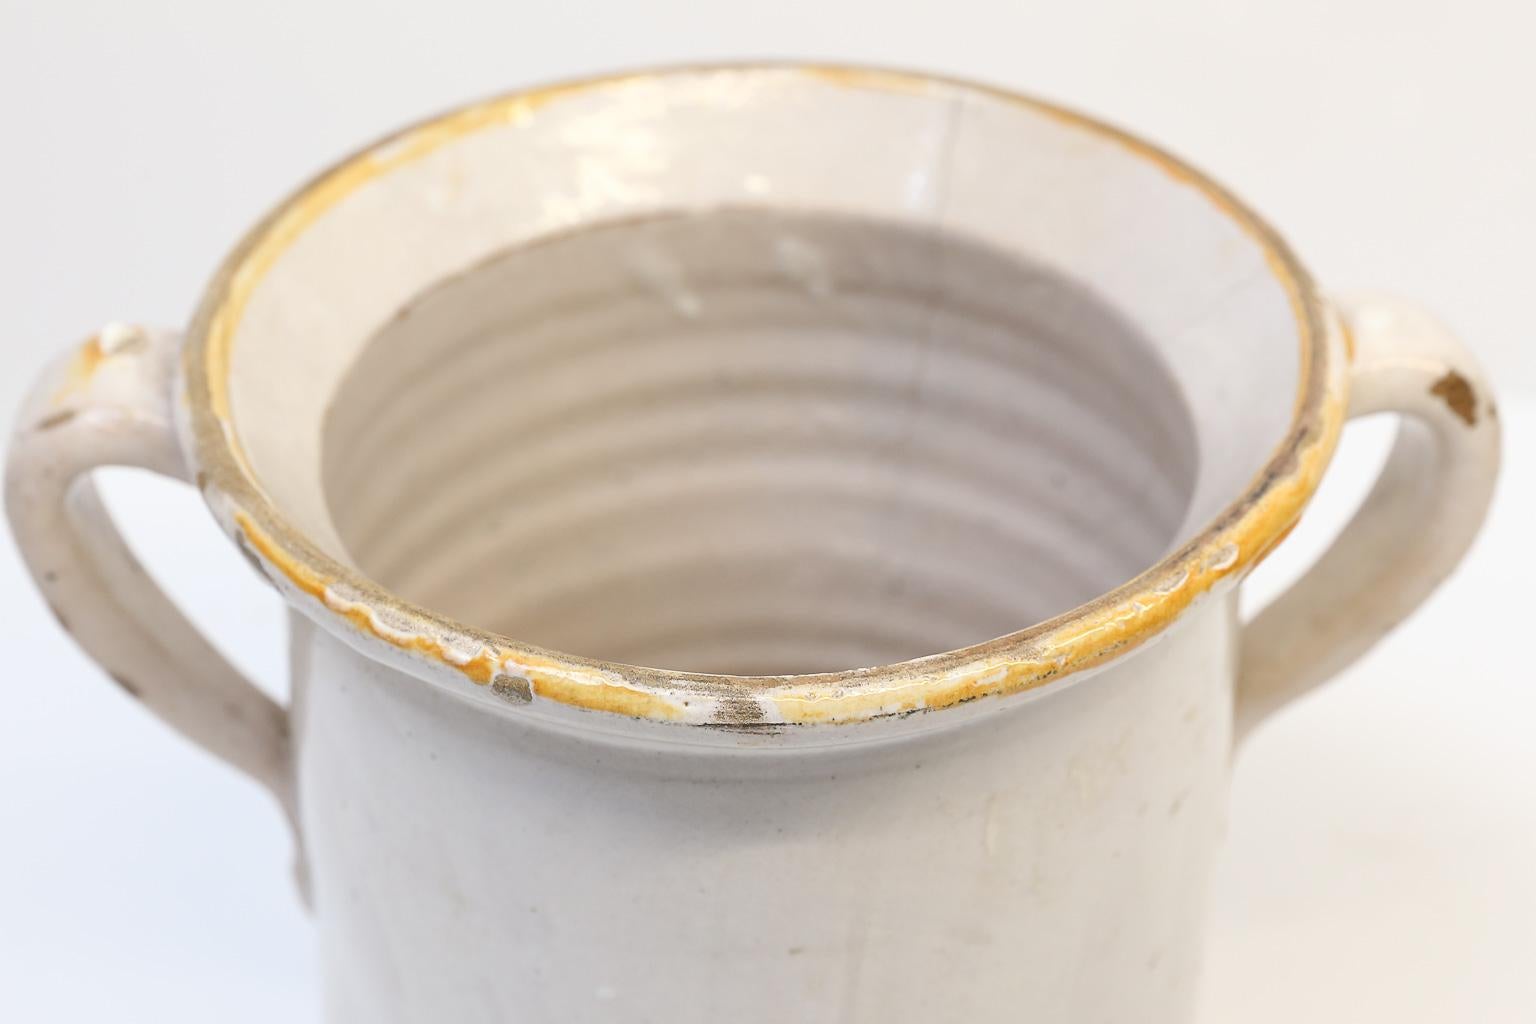 Antique Italian confit pots with handles and touch of yellow glaze on top rims. We currently have four in stock. Price listed is per item. These pots are handmade and slightly vary in size.